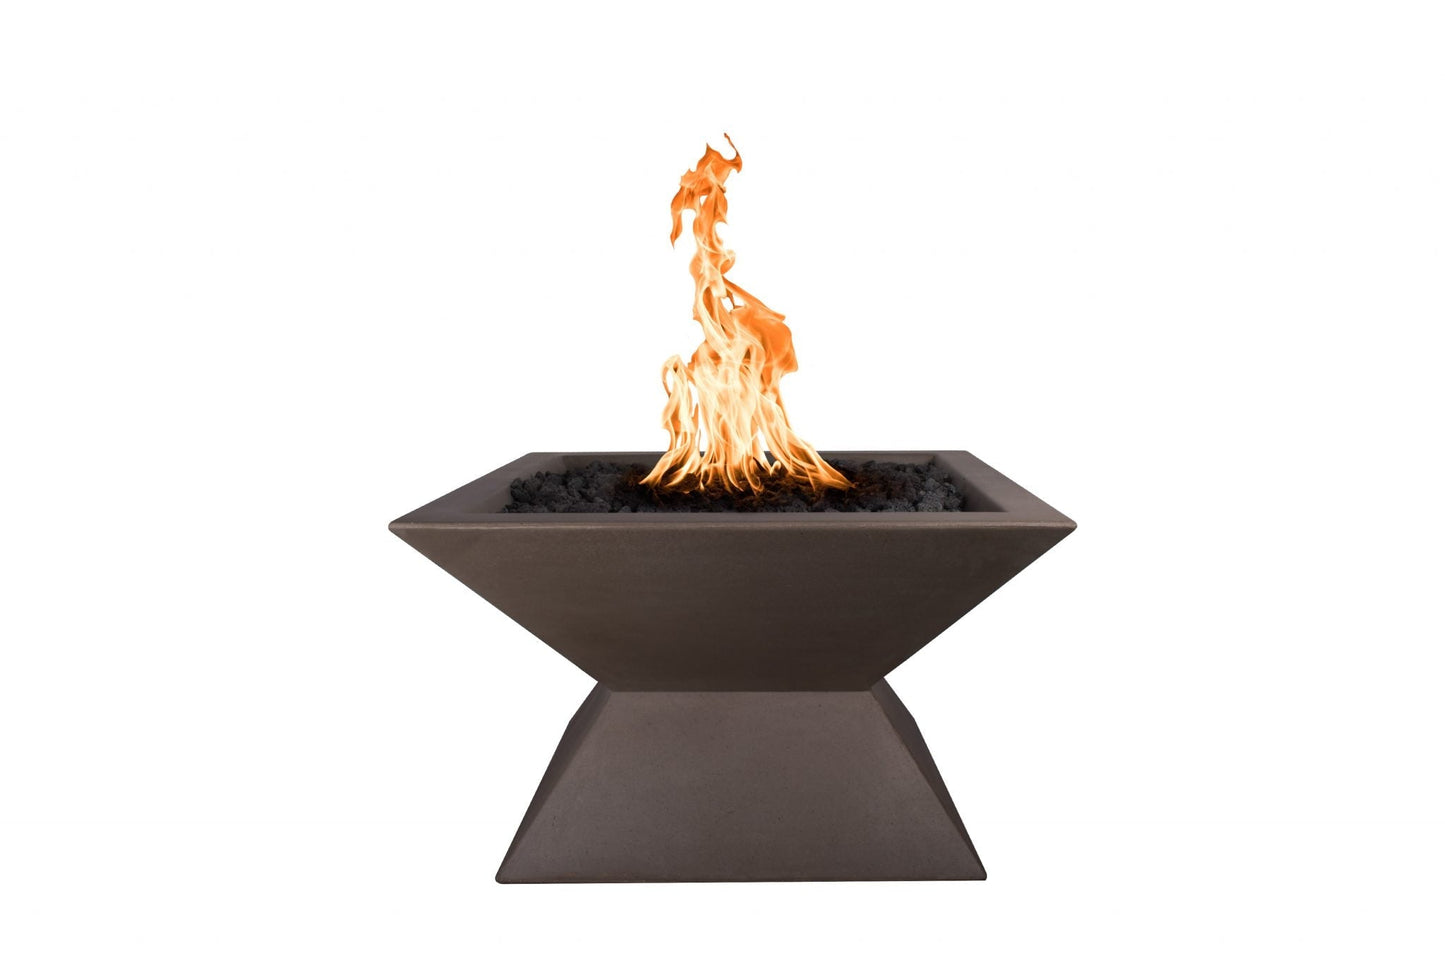 The Outdoor Plus Square Uxmal 30" Gray GFRC Concrete Liquid Propane Fire Pit with Match Lit with Flame Sense Ignition